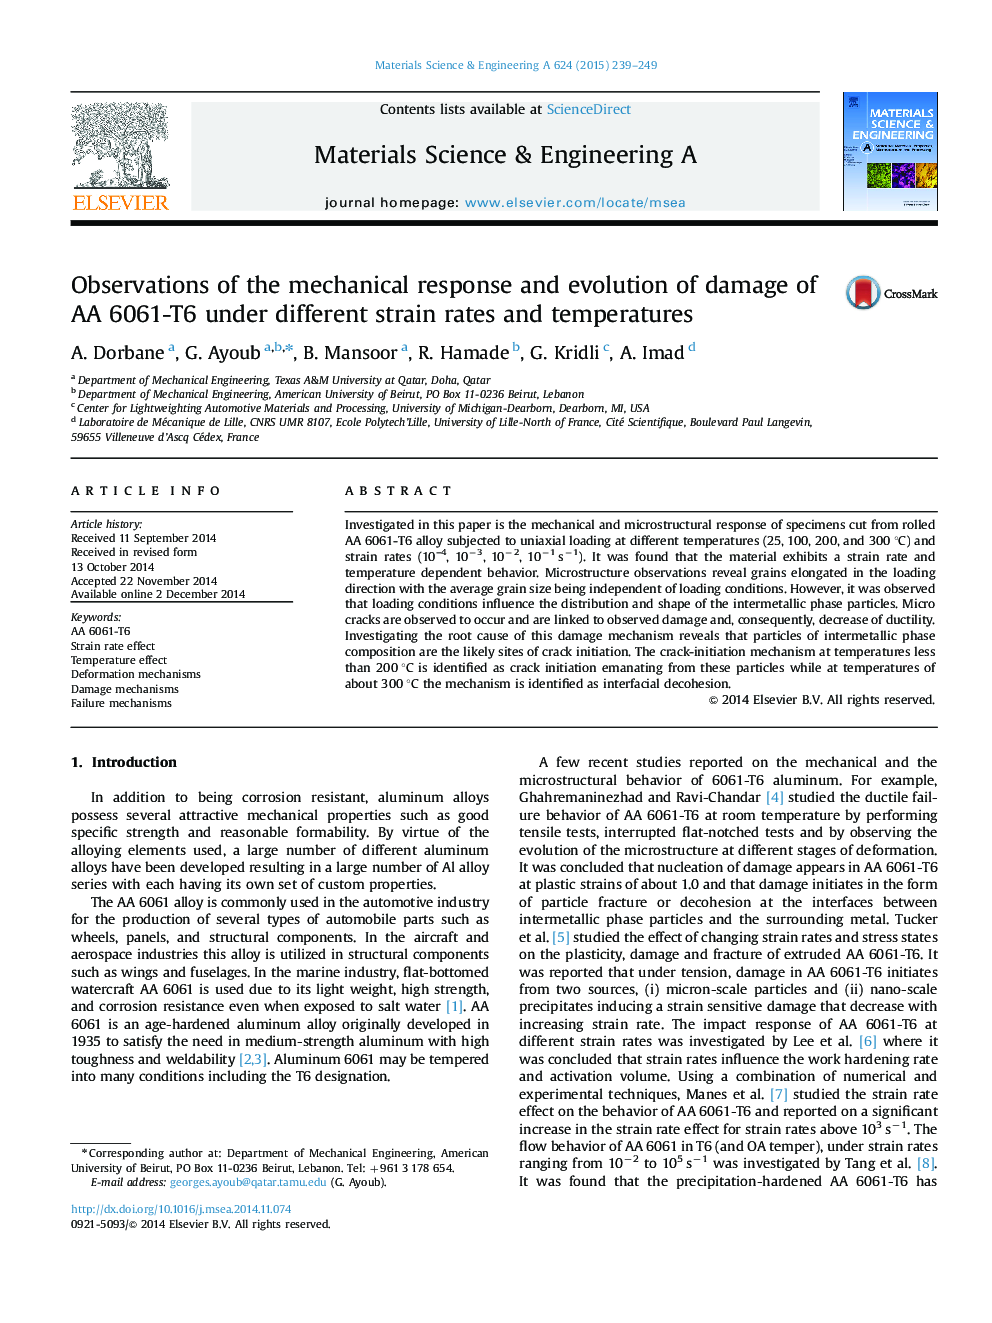 Observations of the mechanical response and evolution of damage of AA 6061-T6 under different strain rates and temperatures